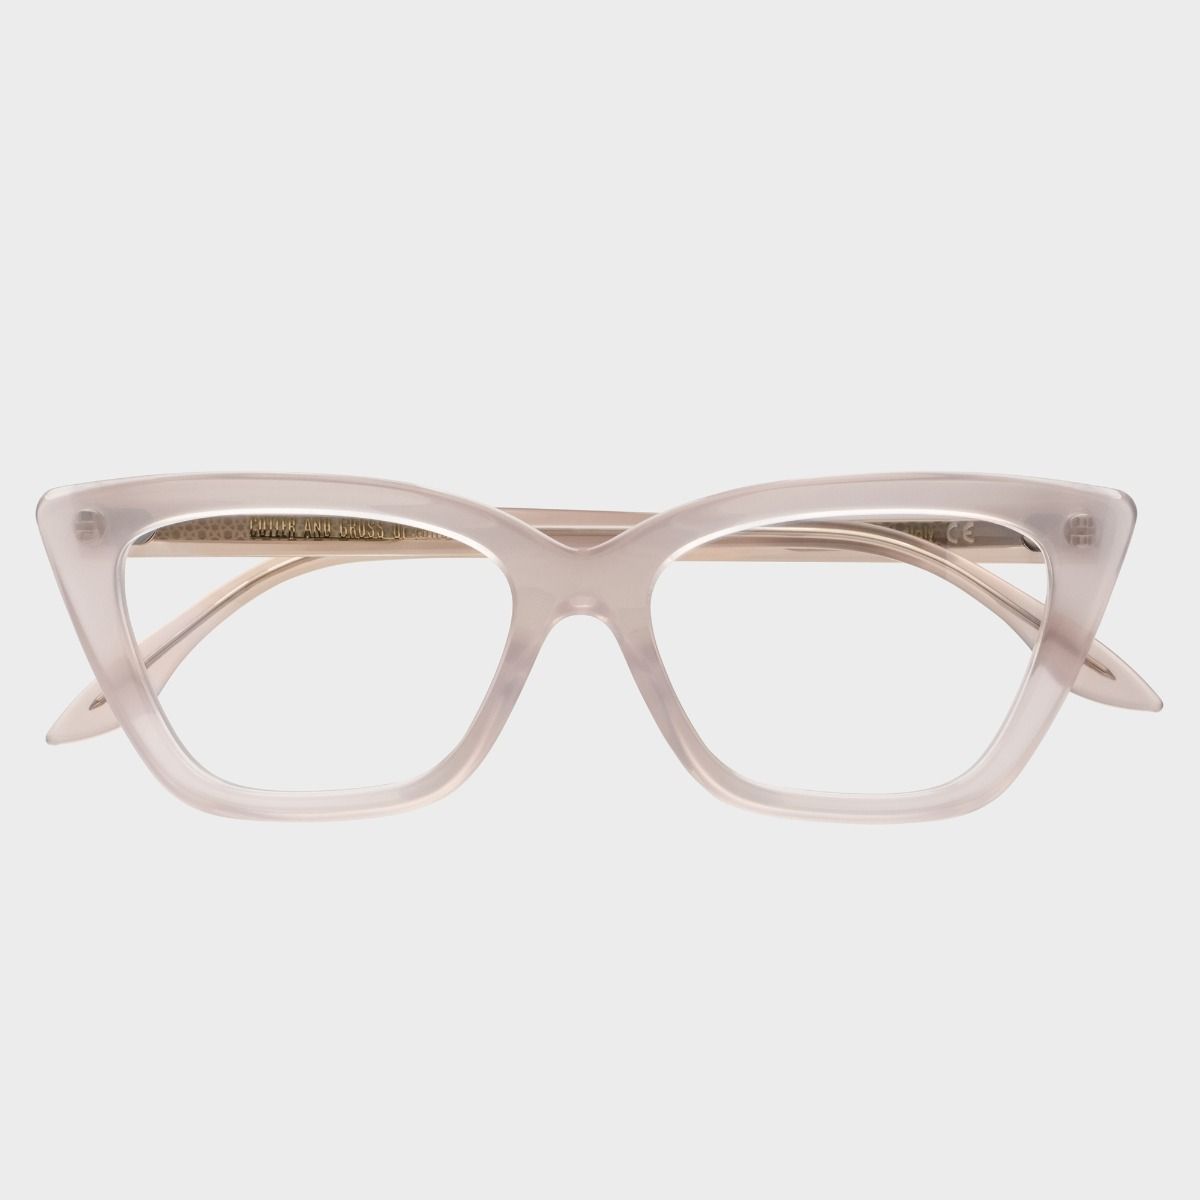 Cutler and Gross, 1241 Optical Cat-Eye Glasses - Prawn Cocktail